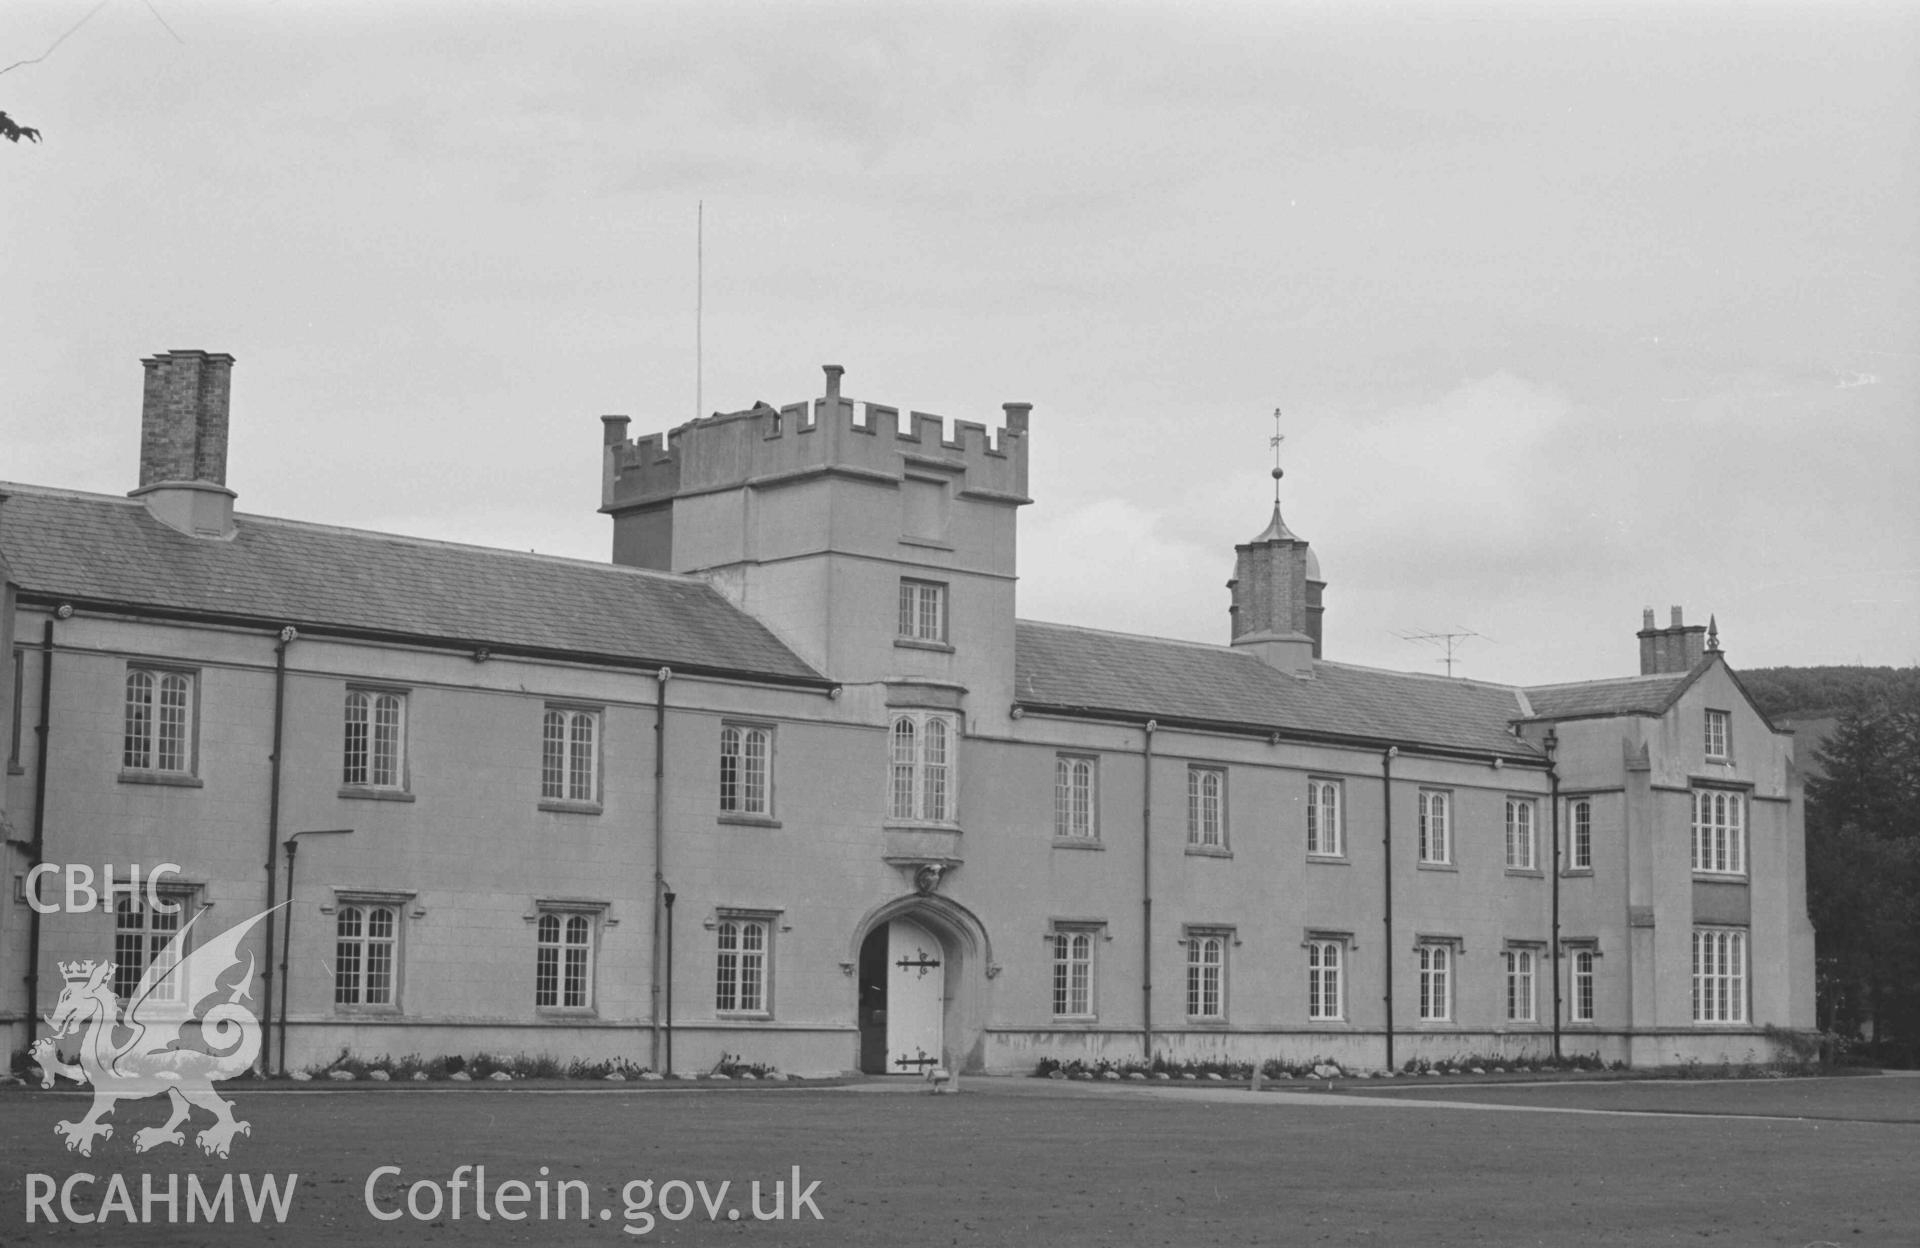 Digital copy of a black and white negative showing the front of the quadrangle at Lampeter College. Photographed by Arthur Chater on 21 August 1968. Looking north east from Grid Reference SN 579 482.